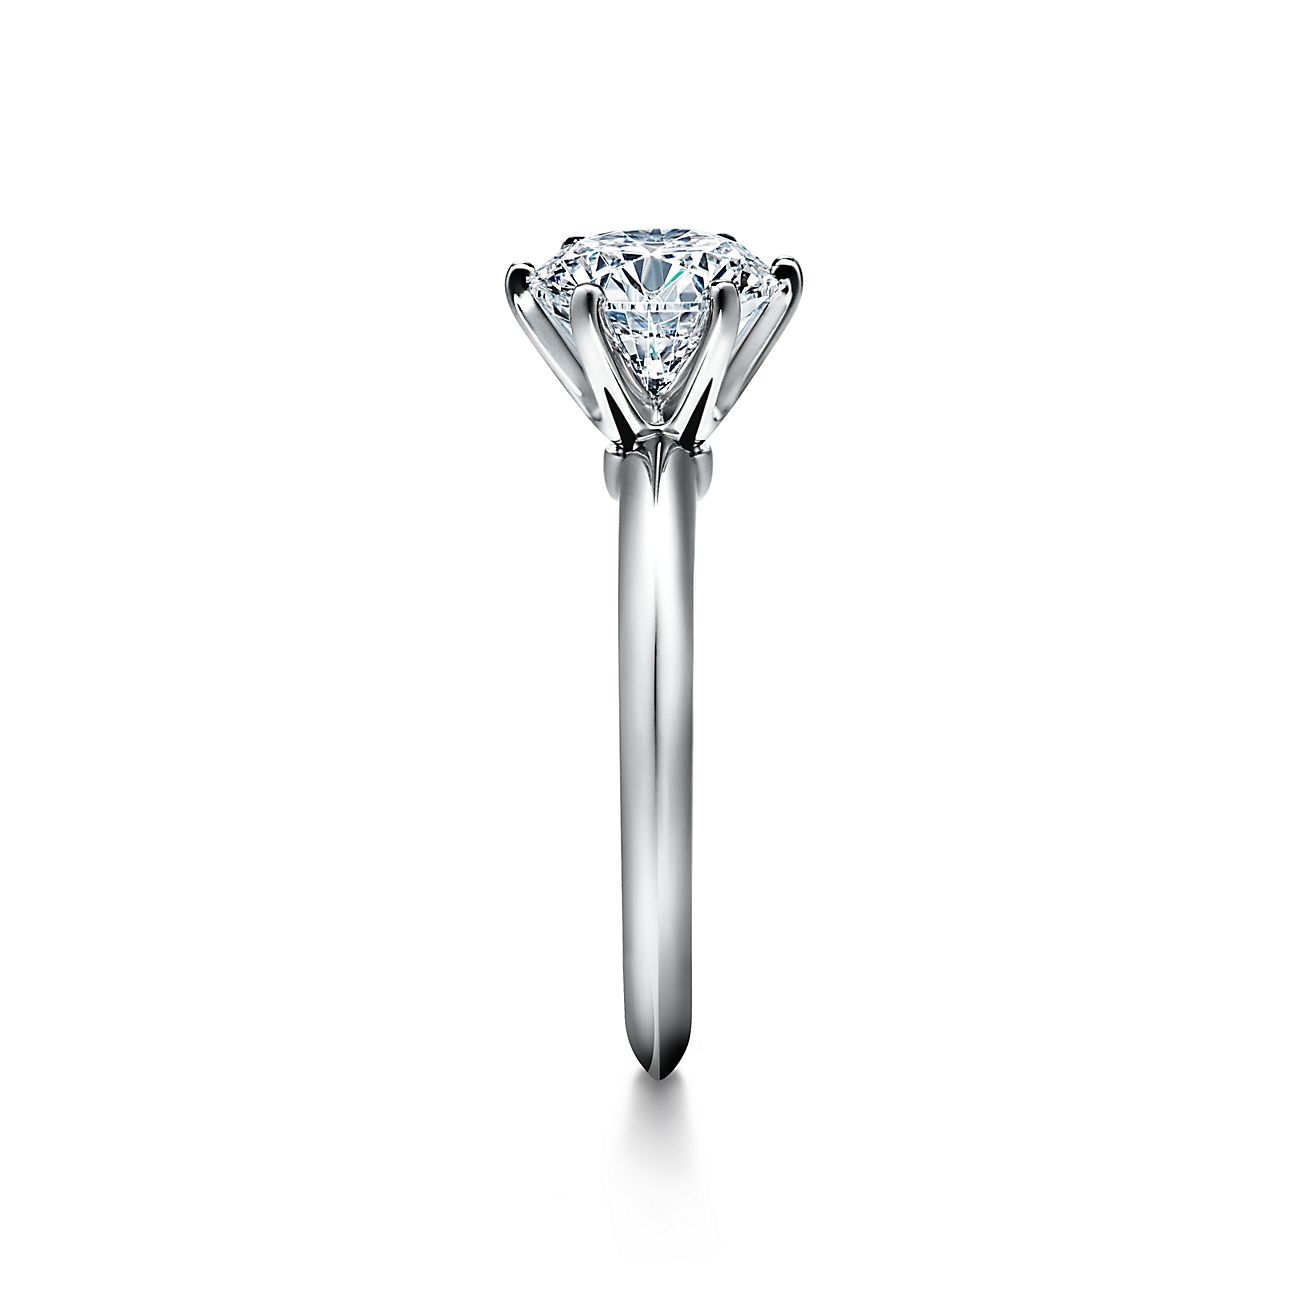 The Tiffany® Setting Engagement Ring in 